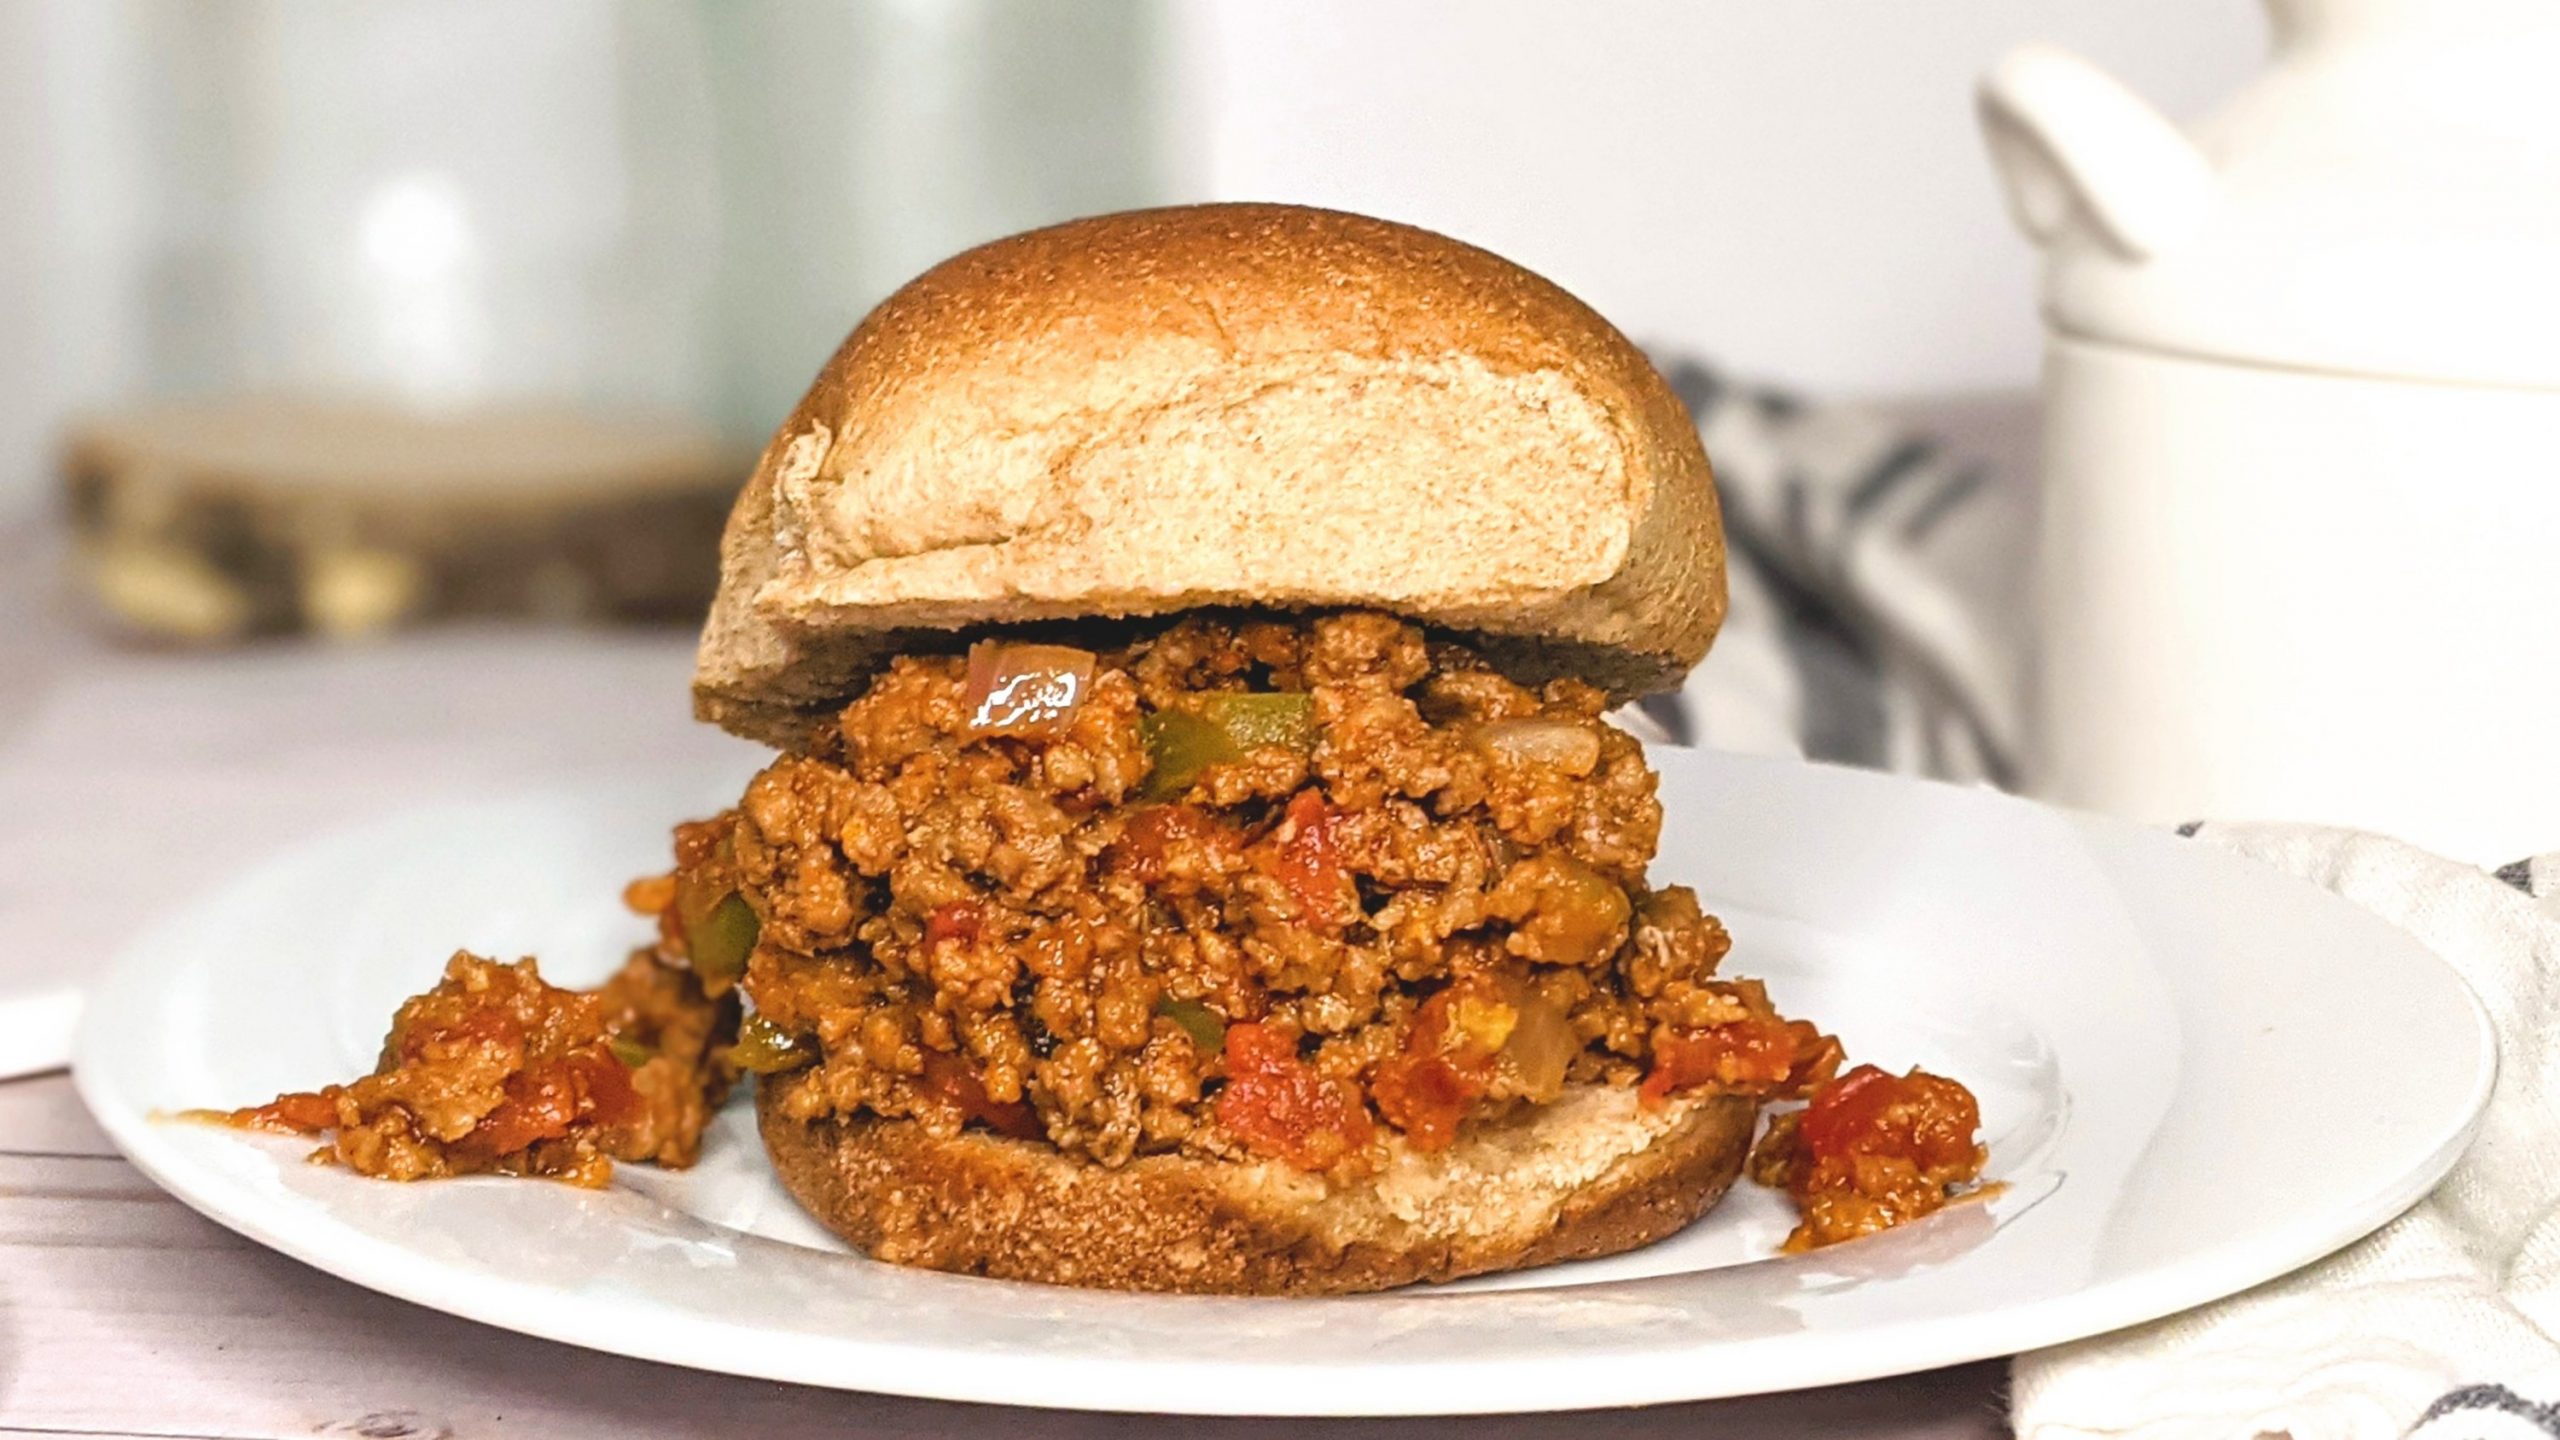 low sodium sloppy joes recipe easy no salt sloppy joes with onions bell pepper tomatoes and spices gluten free